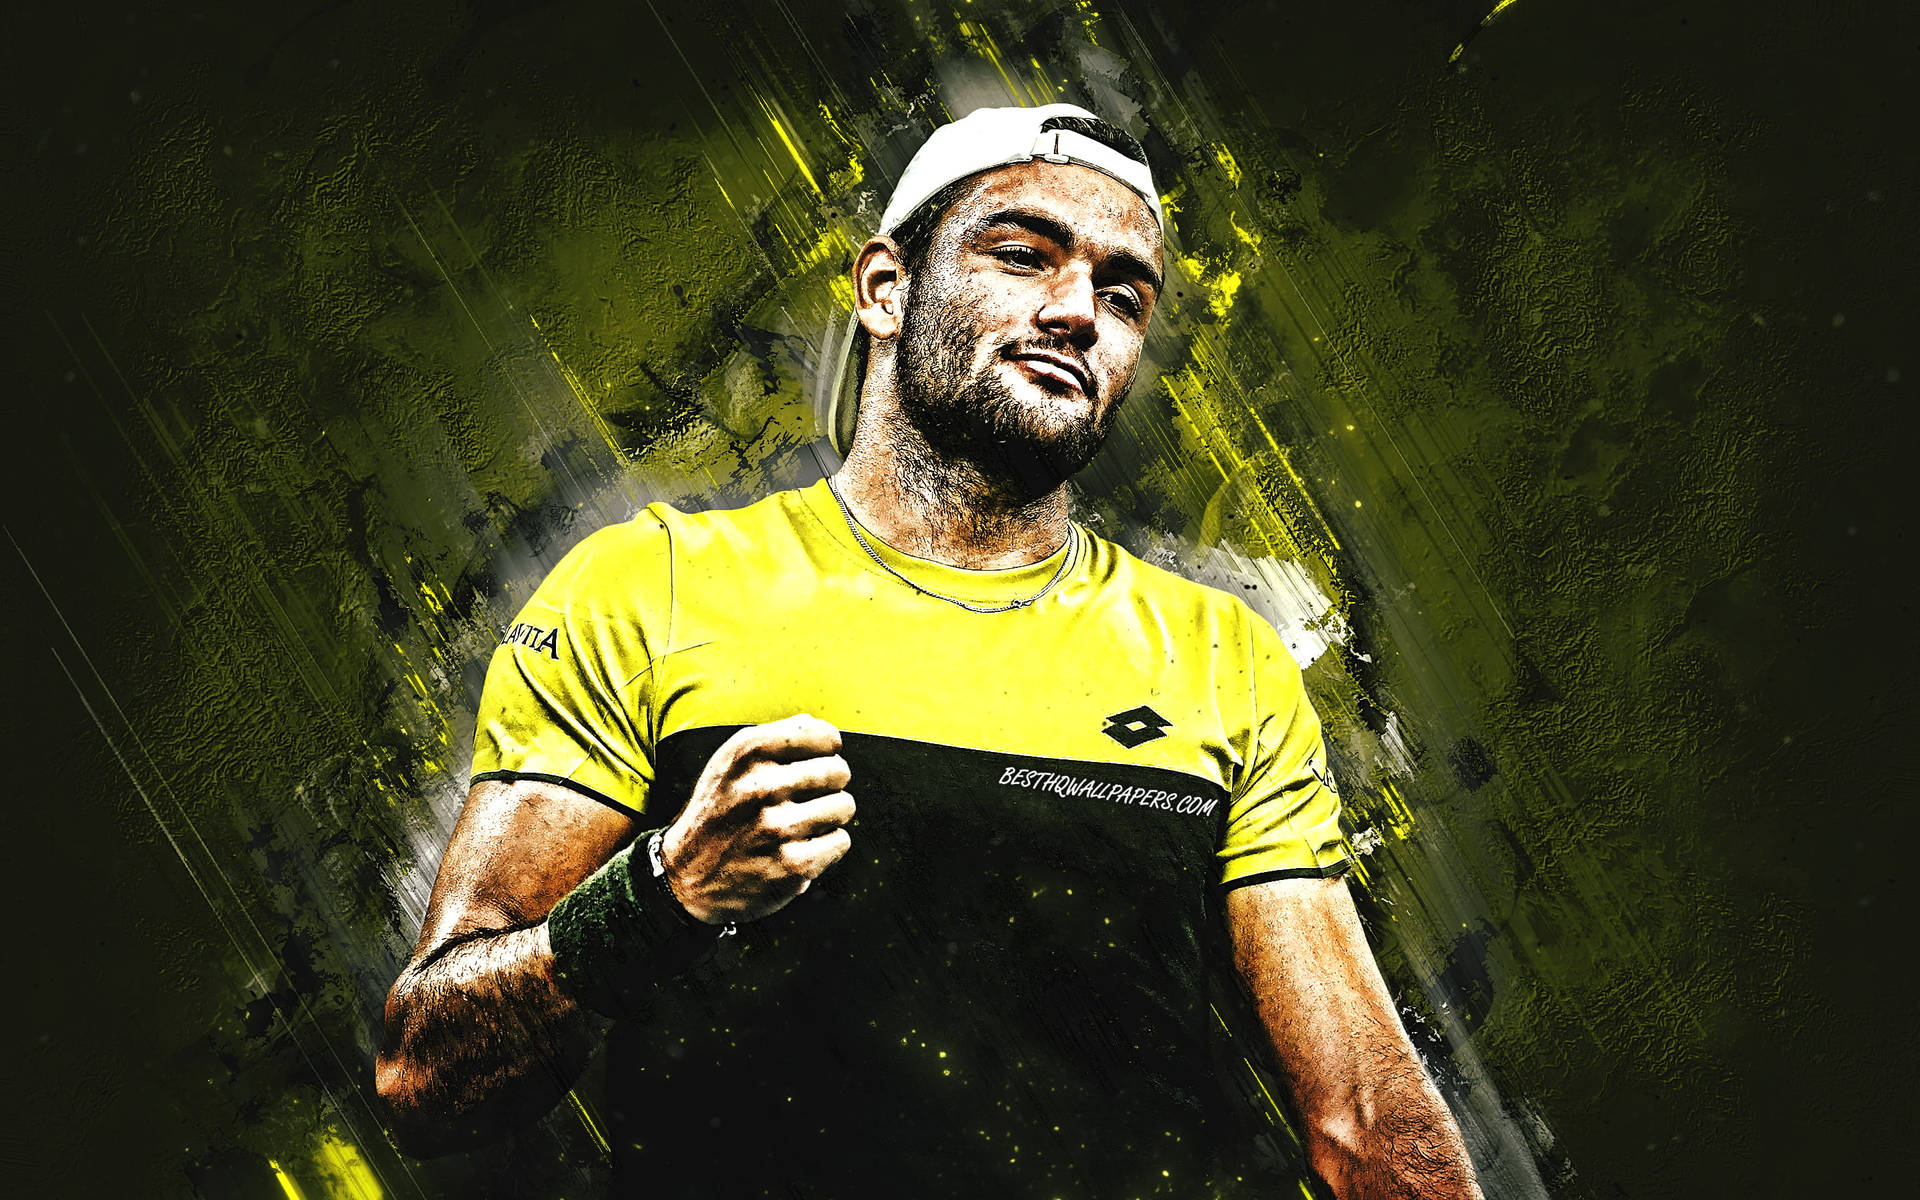 Matteo Berrettini in action during a tennis match Wallpaper